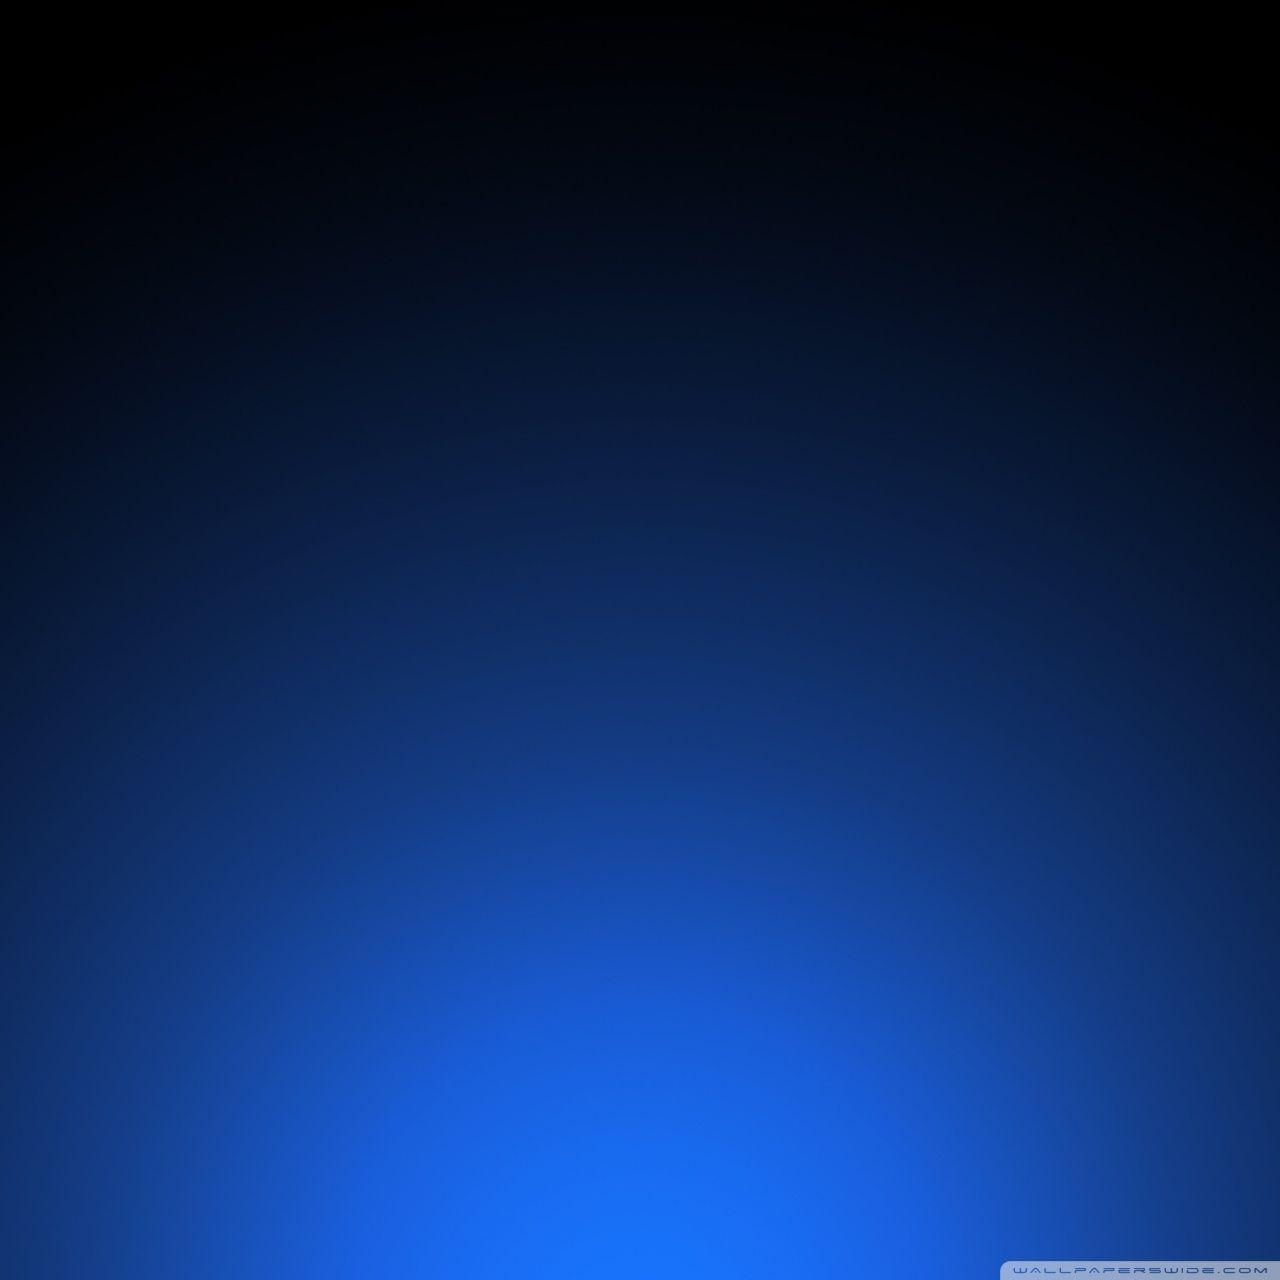 Blue Wallpaper For Android